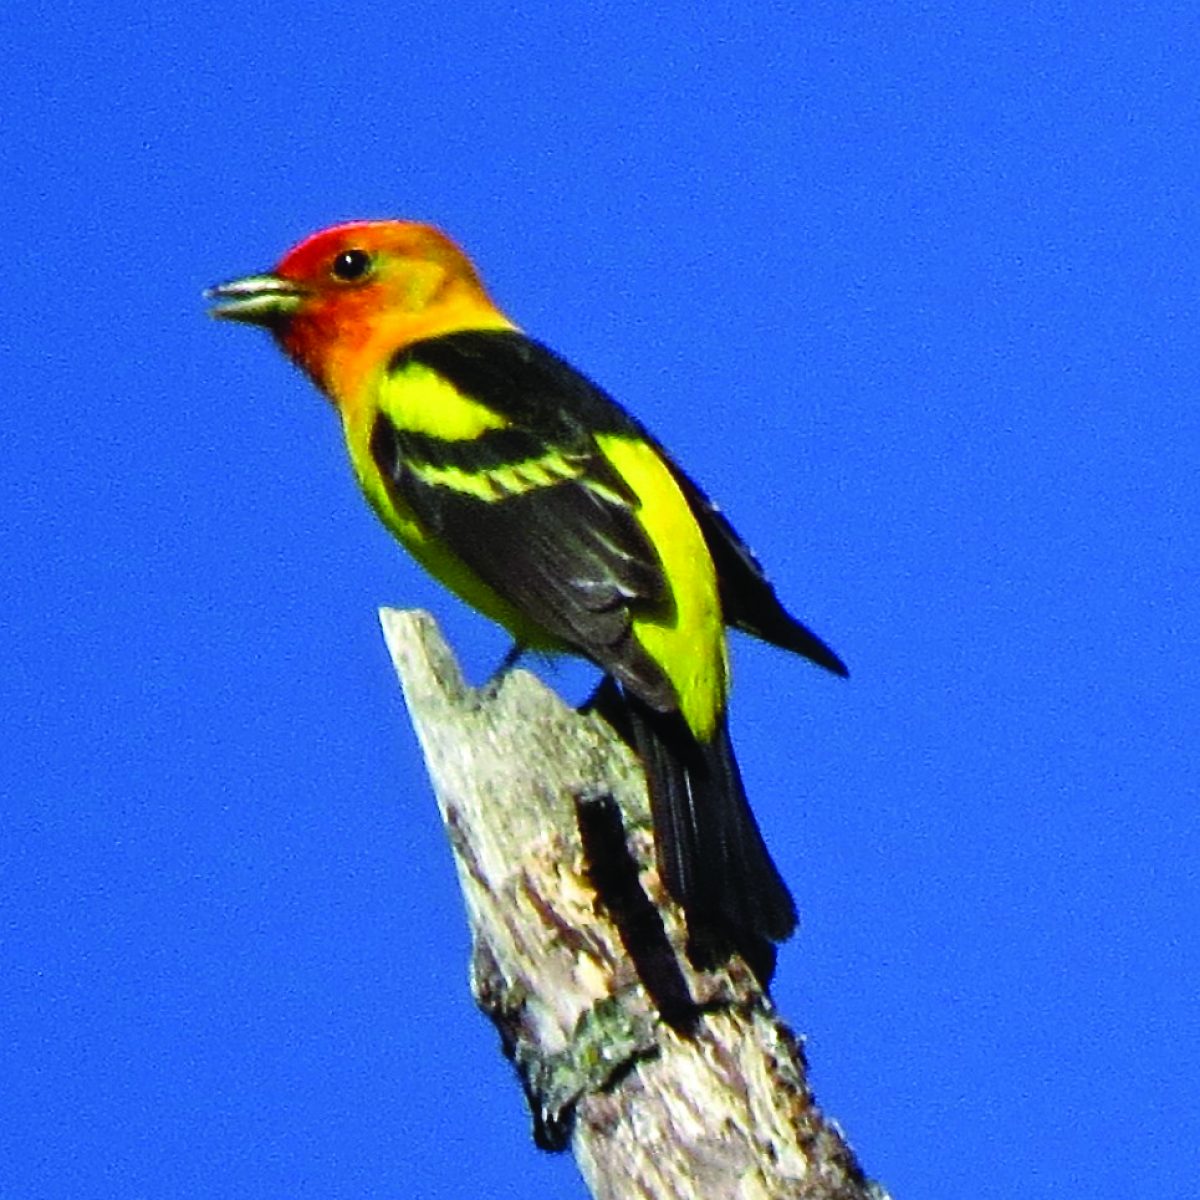 Western Tanager at Vollmer Peak by Denise Wight